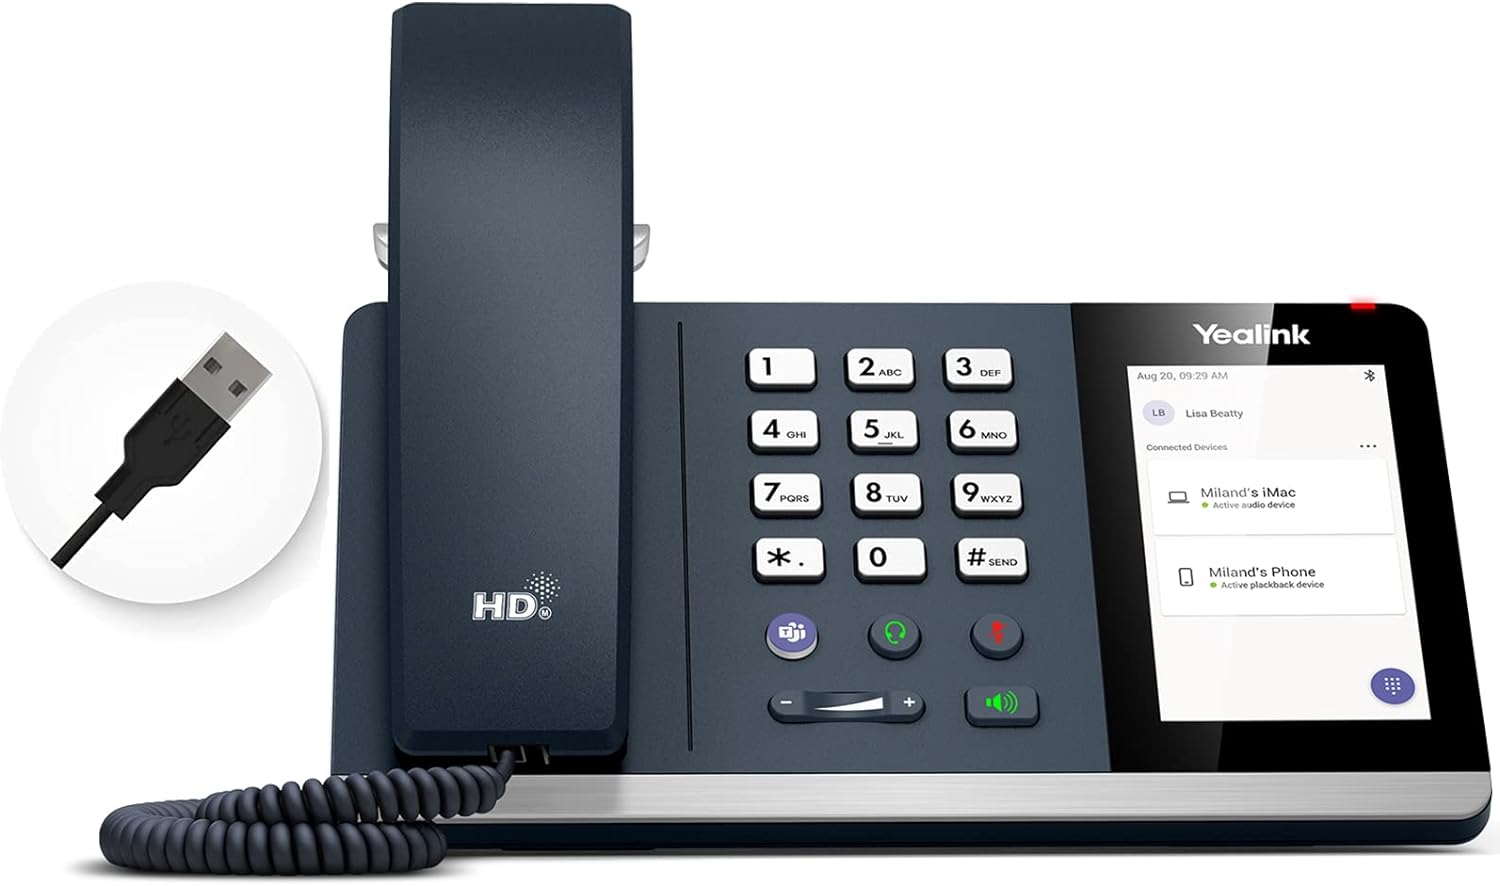 With USB and Bluetooth connectivity's, hands-free speakerphone, 4-inch multi-point touchscreen and USB hub feature, the MP50 is able to integrate multiple devices into a single phone for unified call controlling.